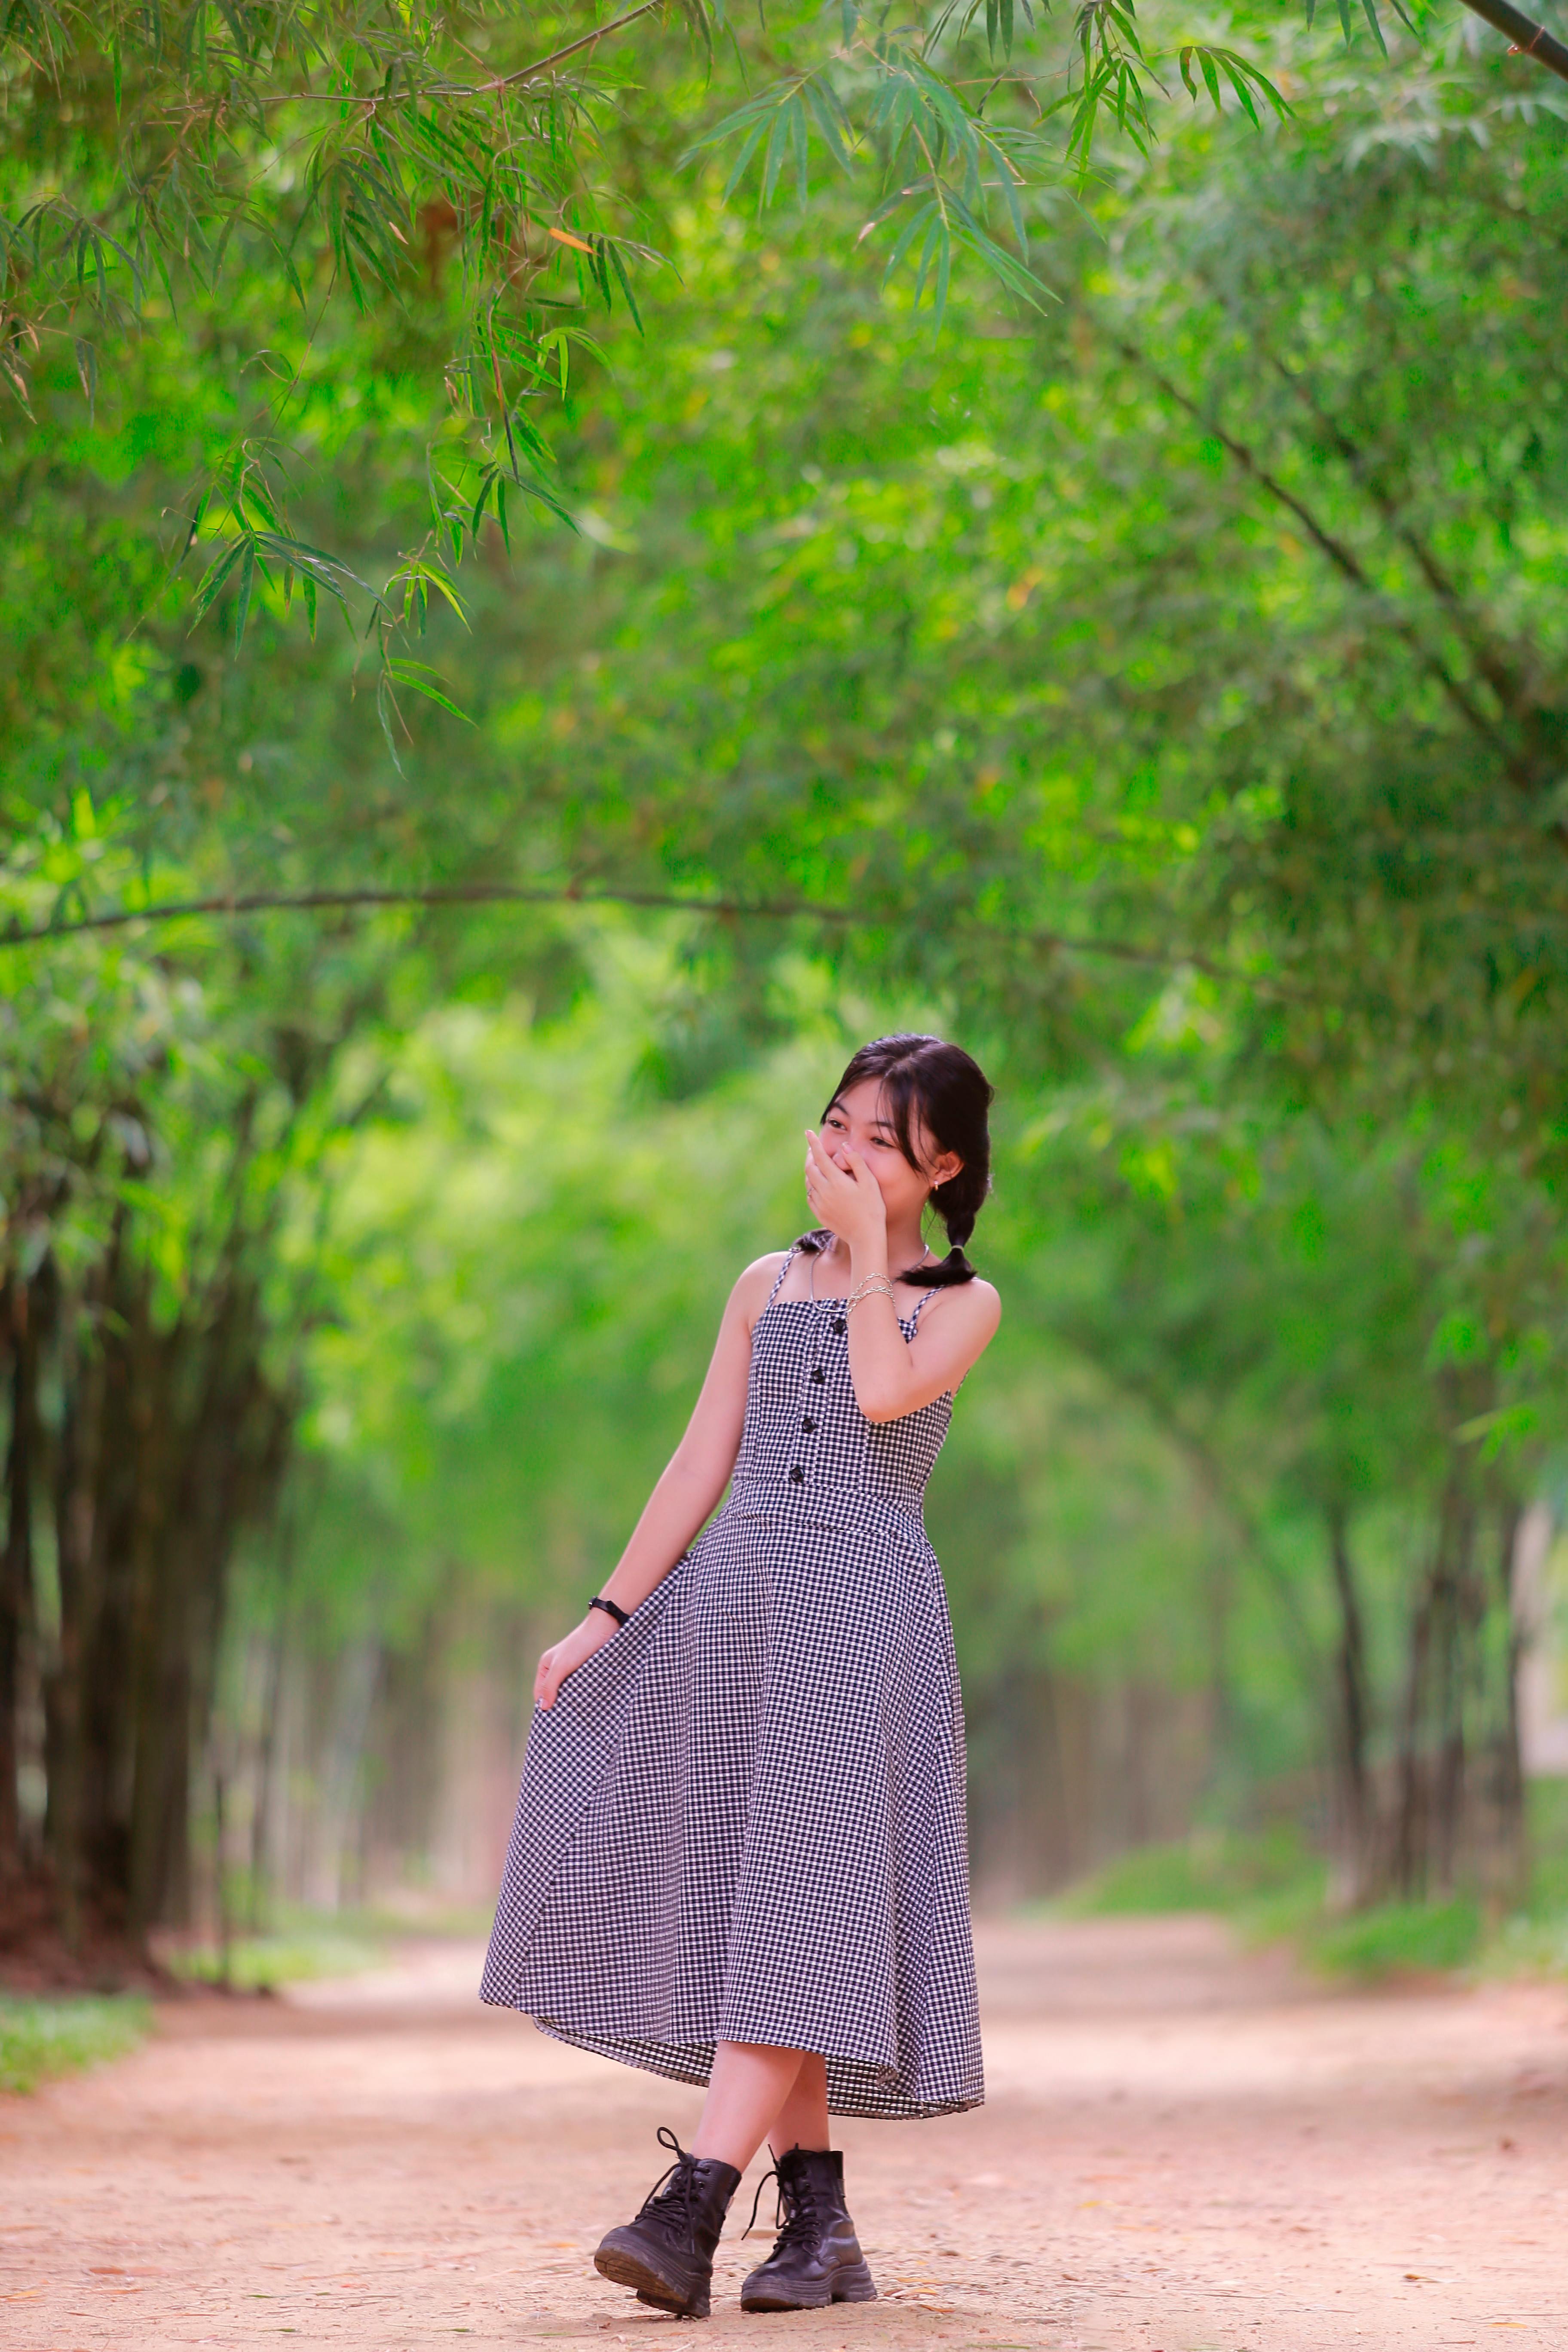 free photo of girl in a dress posing in a park